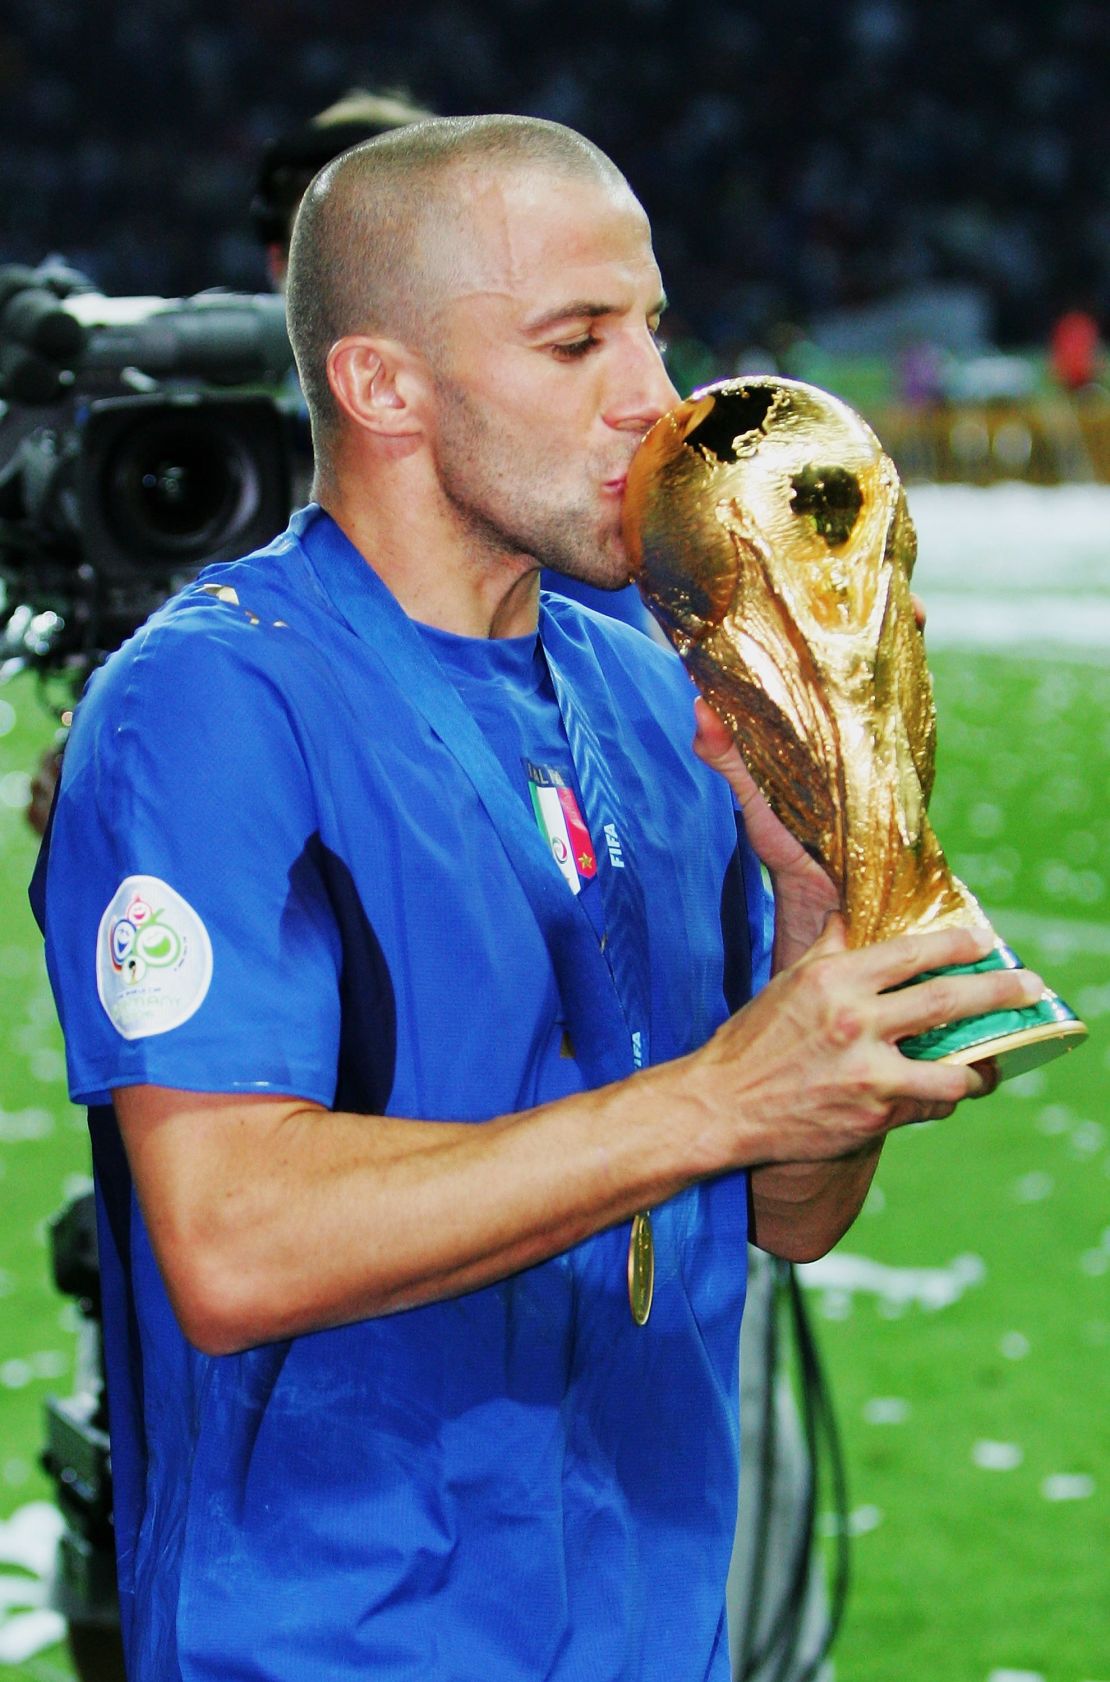 Del Piero kisses the World Cup trophy following his team's victory in a penalty shootout in 2006.